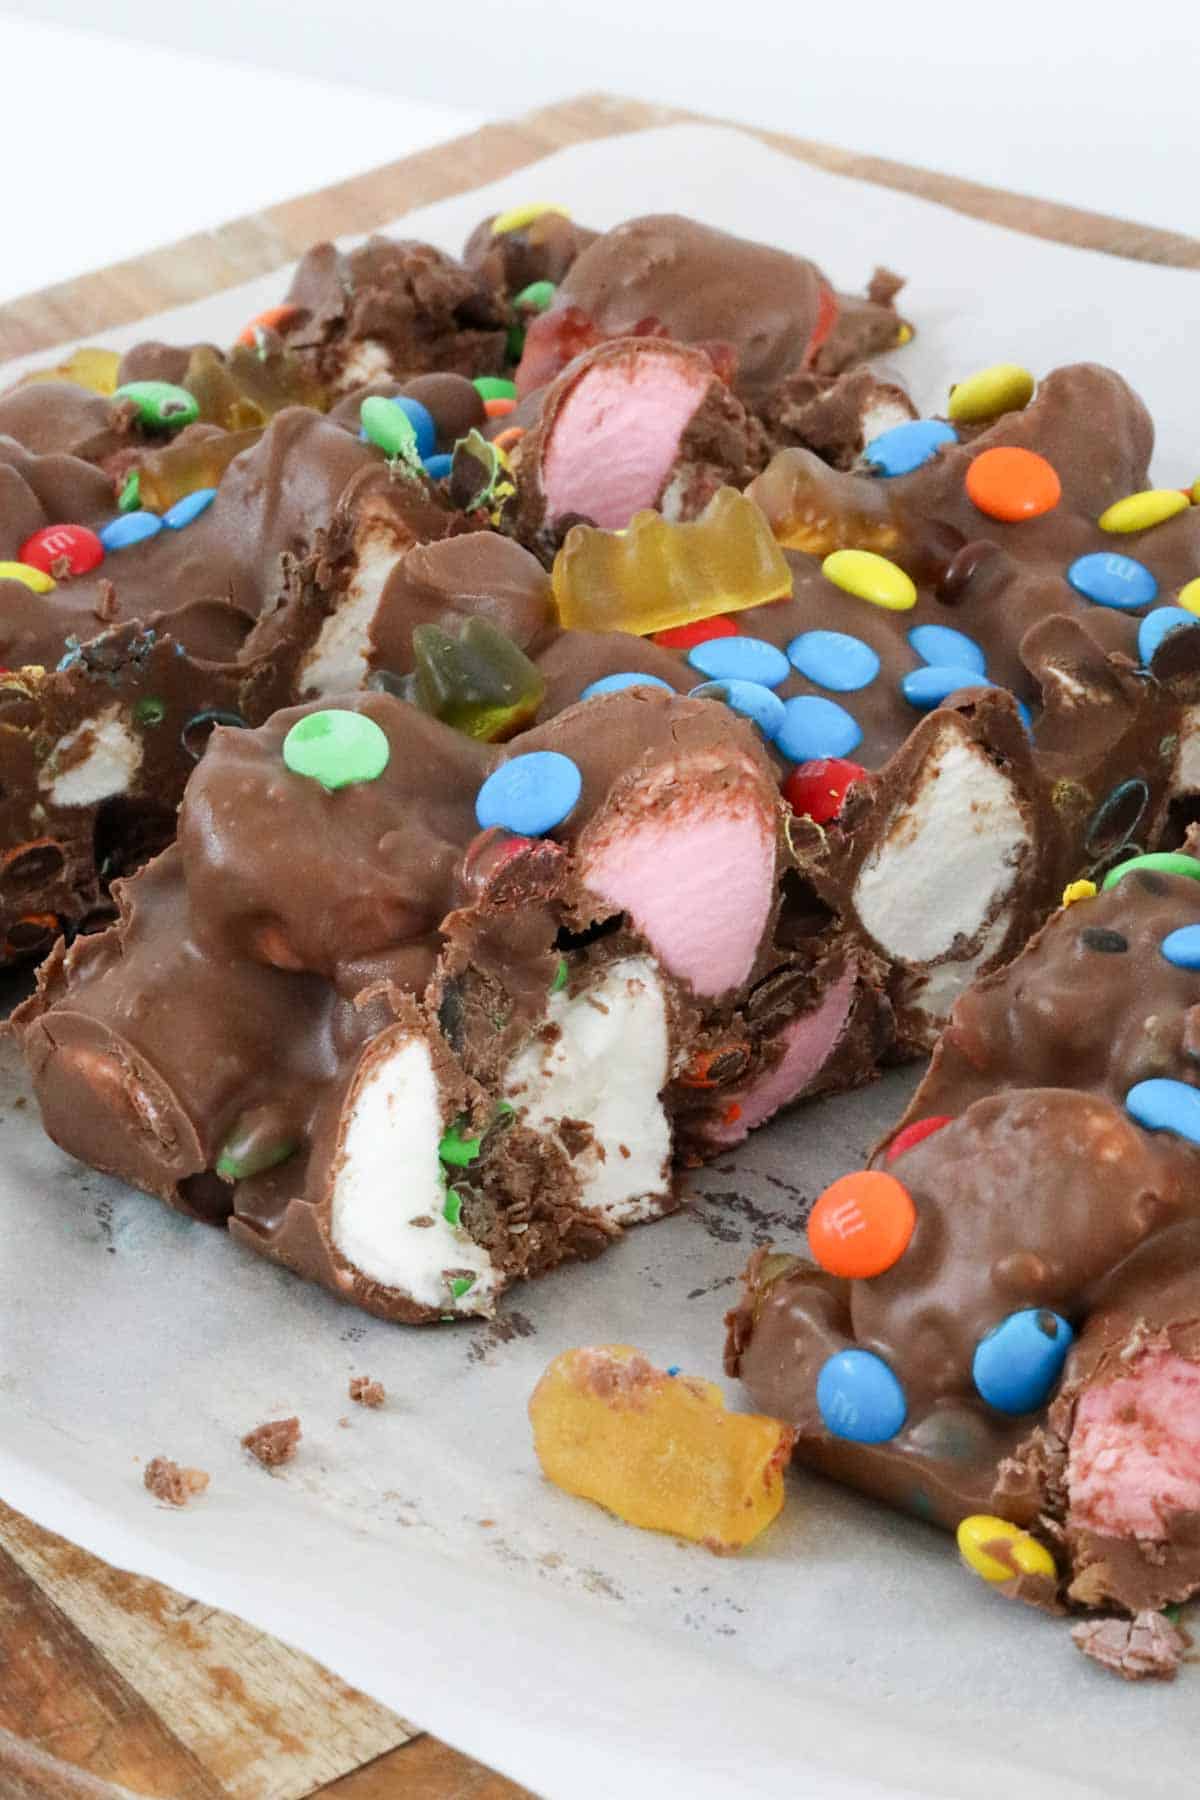 Close up of a large slice of rocky road to show the marshmallows and gummi bears.